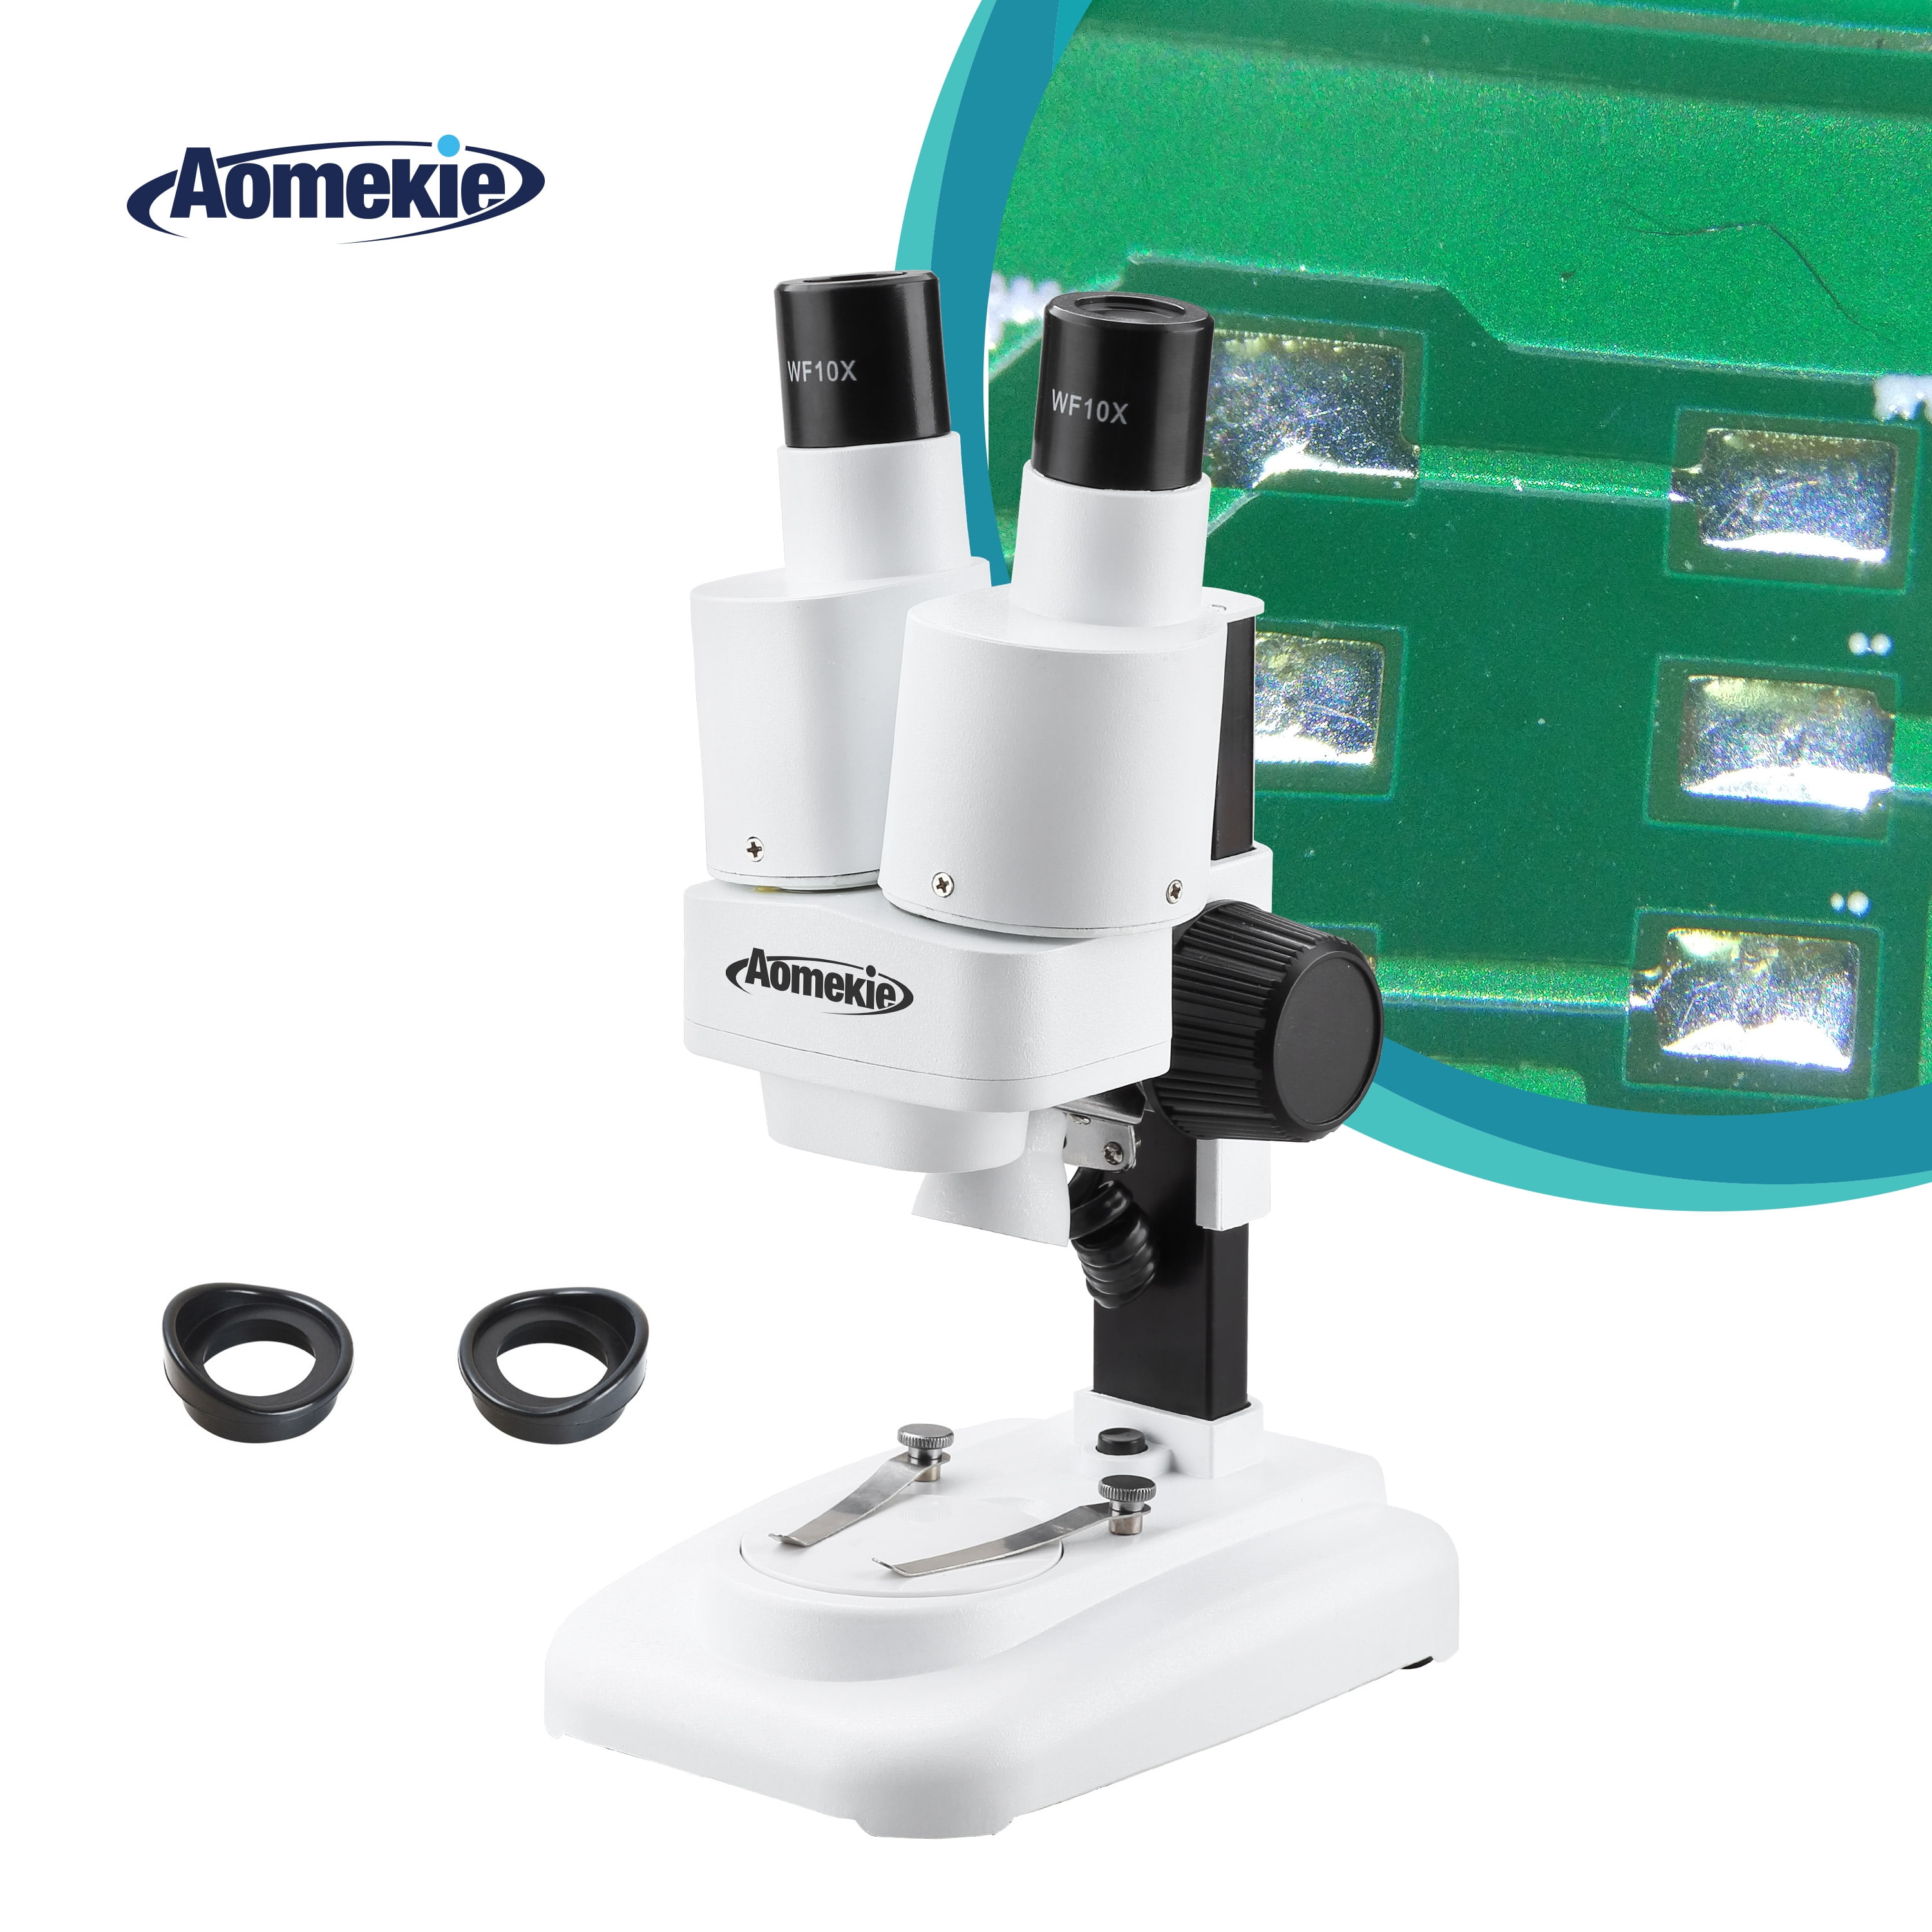 0.7X-4.5X Zoom Objective AmScope SM-1BNZ Professional Binocular Stereo Zoom Microscope Ambient Lighting Pillar Stand WH10x Eyepieces Includes 0.5x and 2.0x Barlow Lenses 3.5X-90X Magnification 